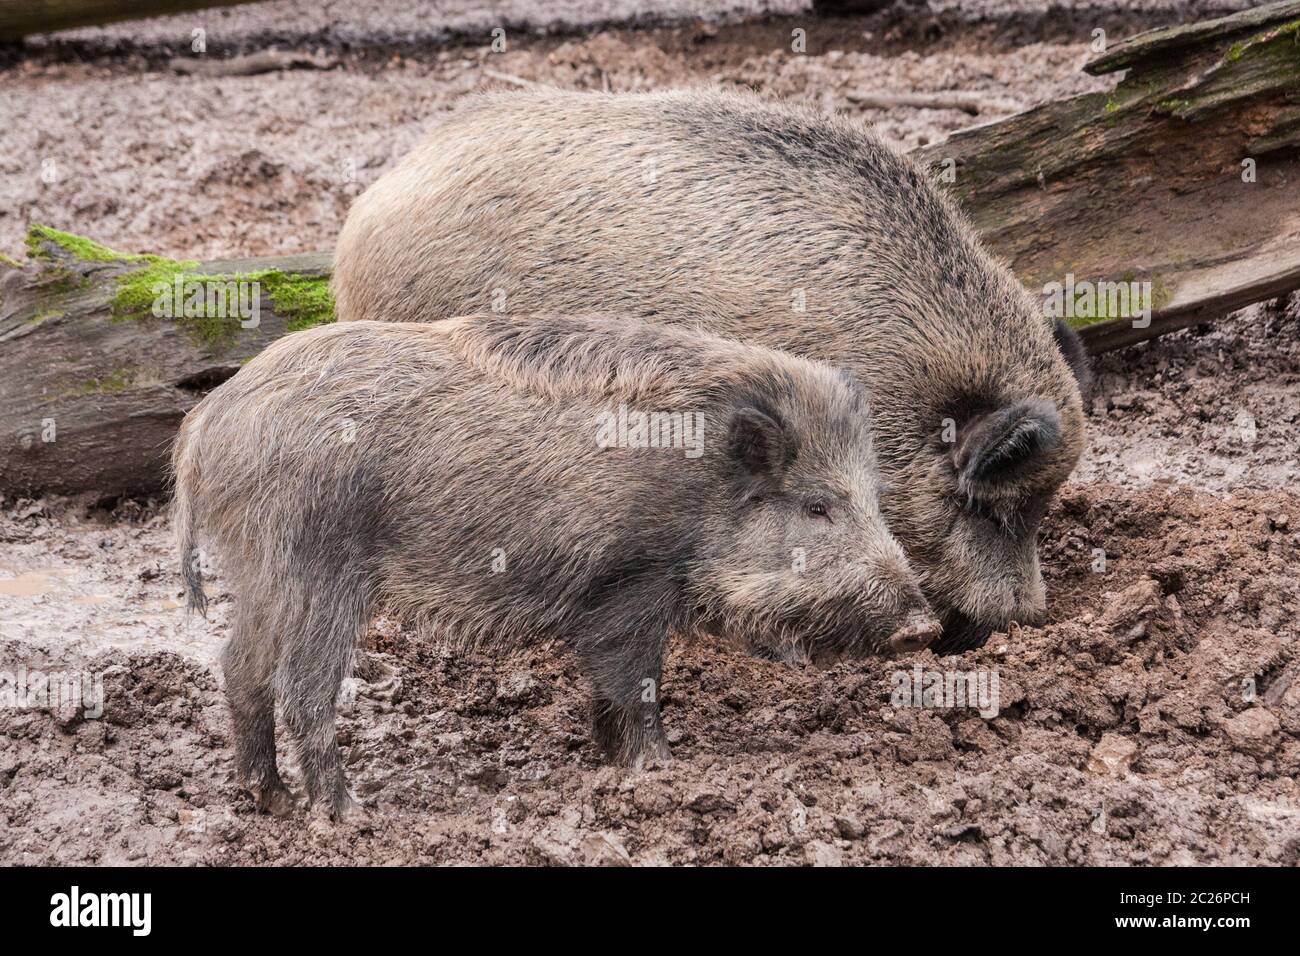 Two hairy porks in the mud. Wildlife and farming concept. Stock Photo